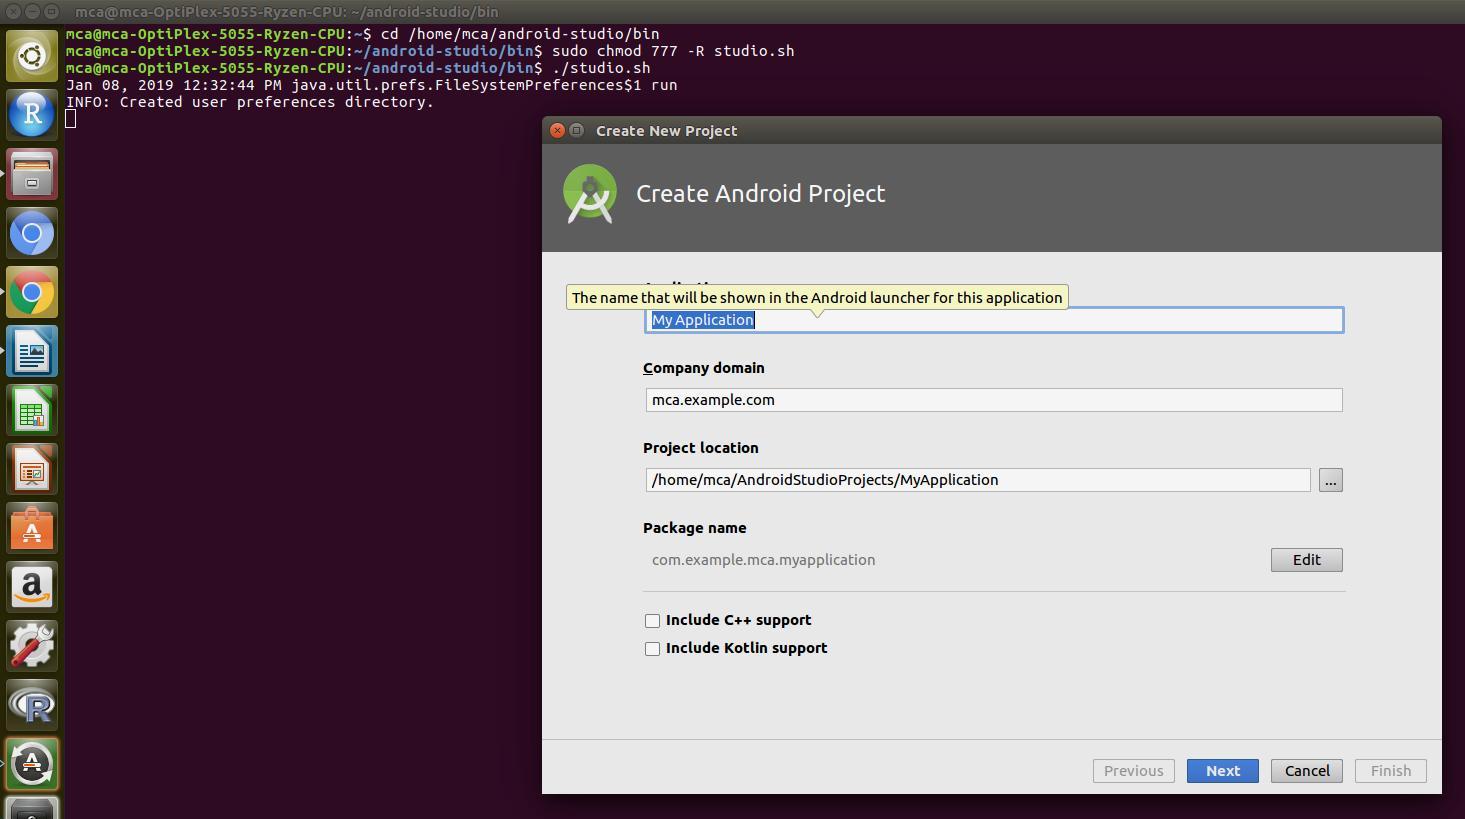 how to install android studio in ubuntu or command to install android studio in ubuntu